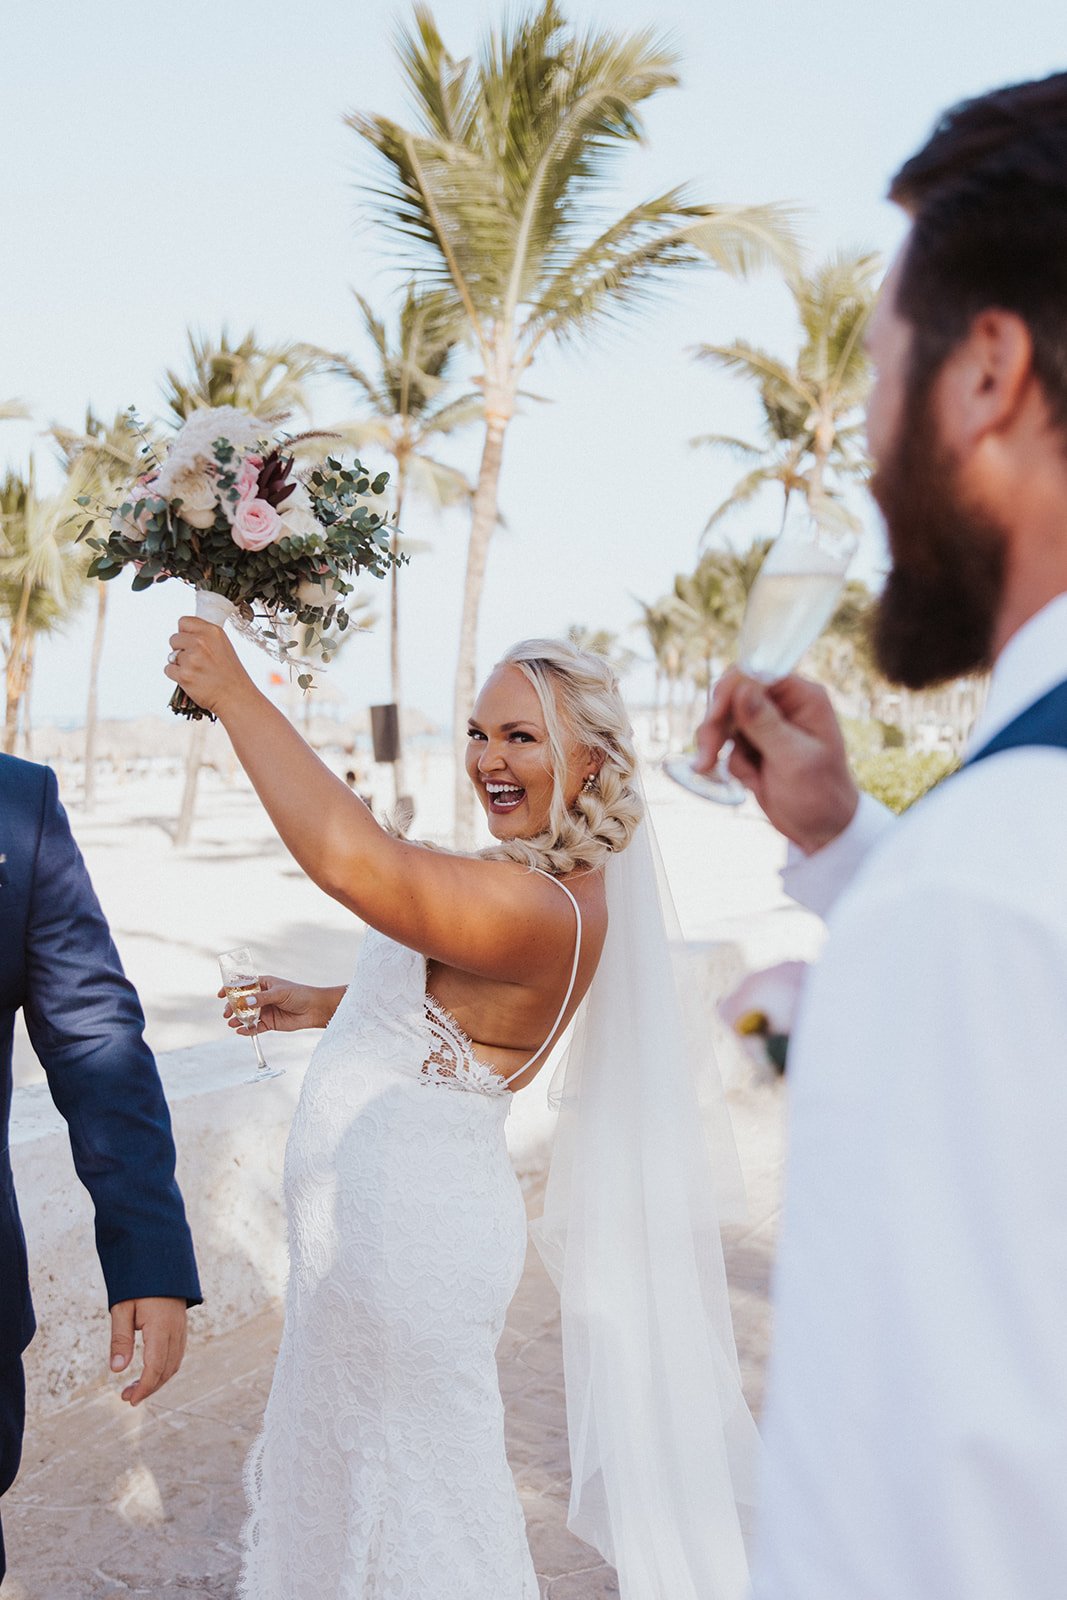  A bride smiling wearing Anais Anette ‘Emmanuelle wedding dress and holding up a lovely bridal bouquet after saying “I do” on the beach 